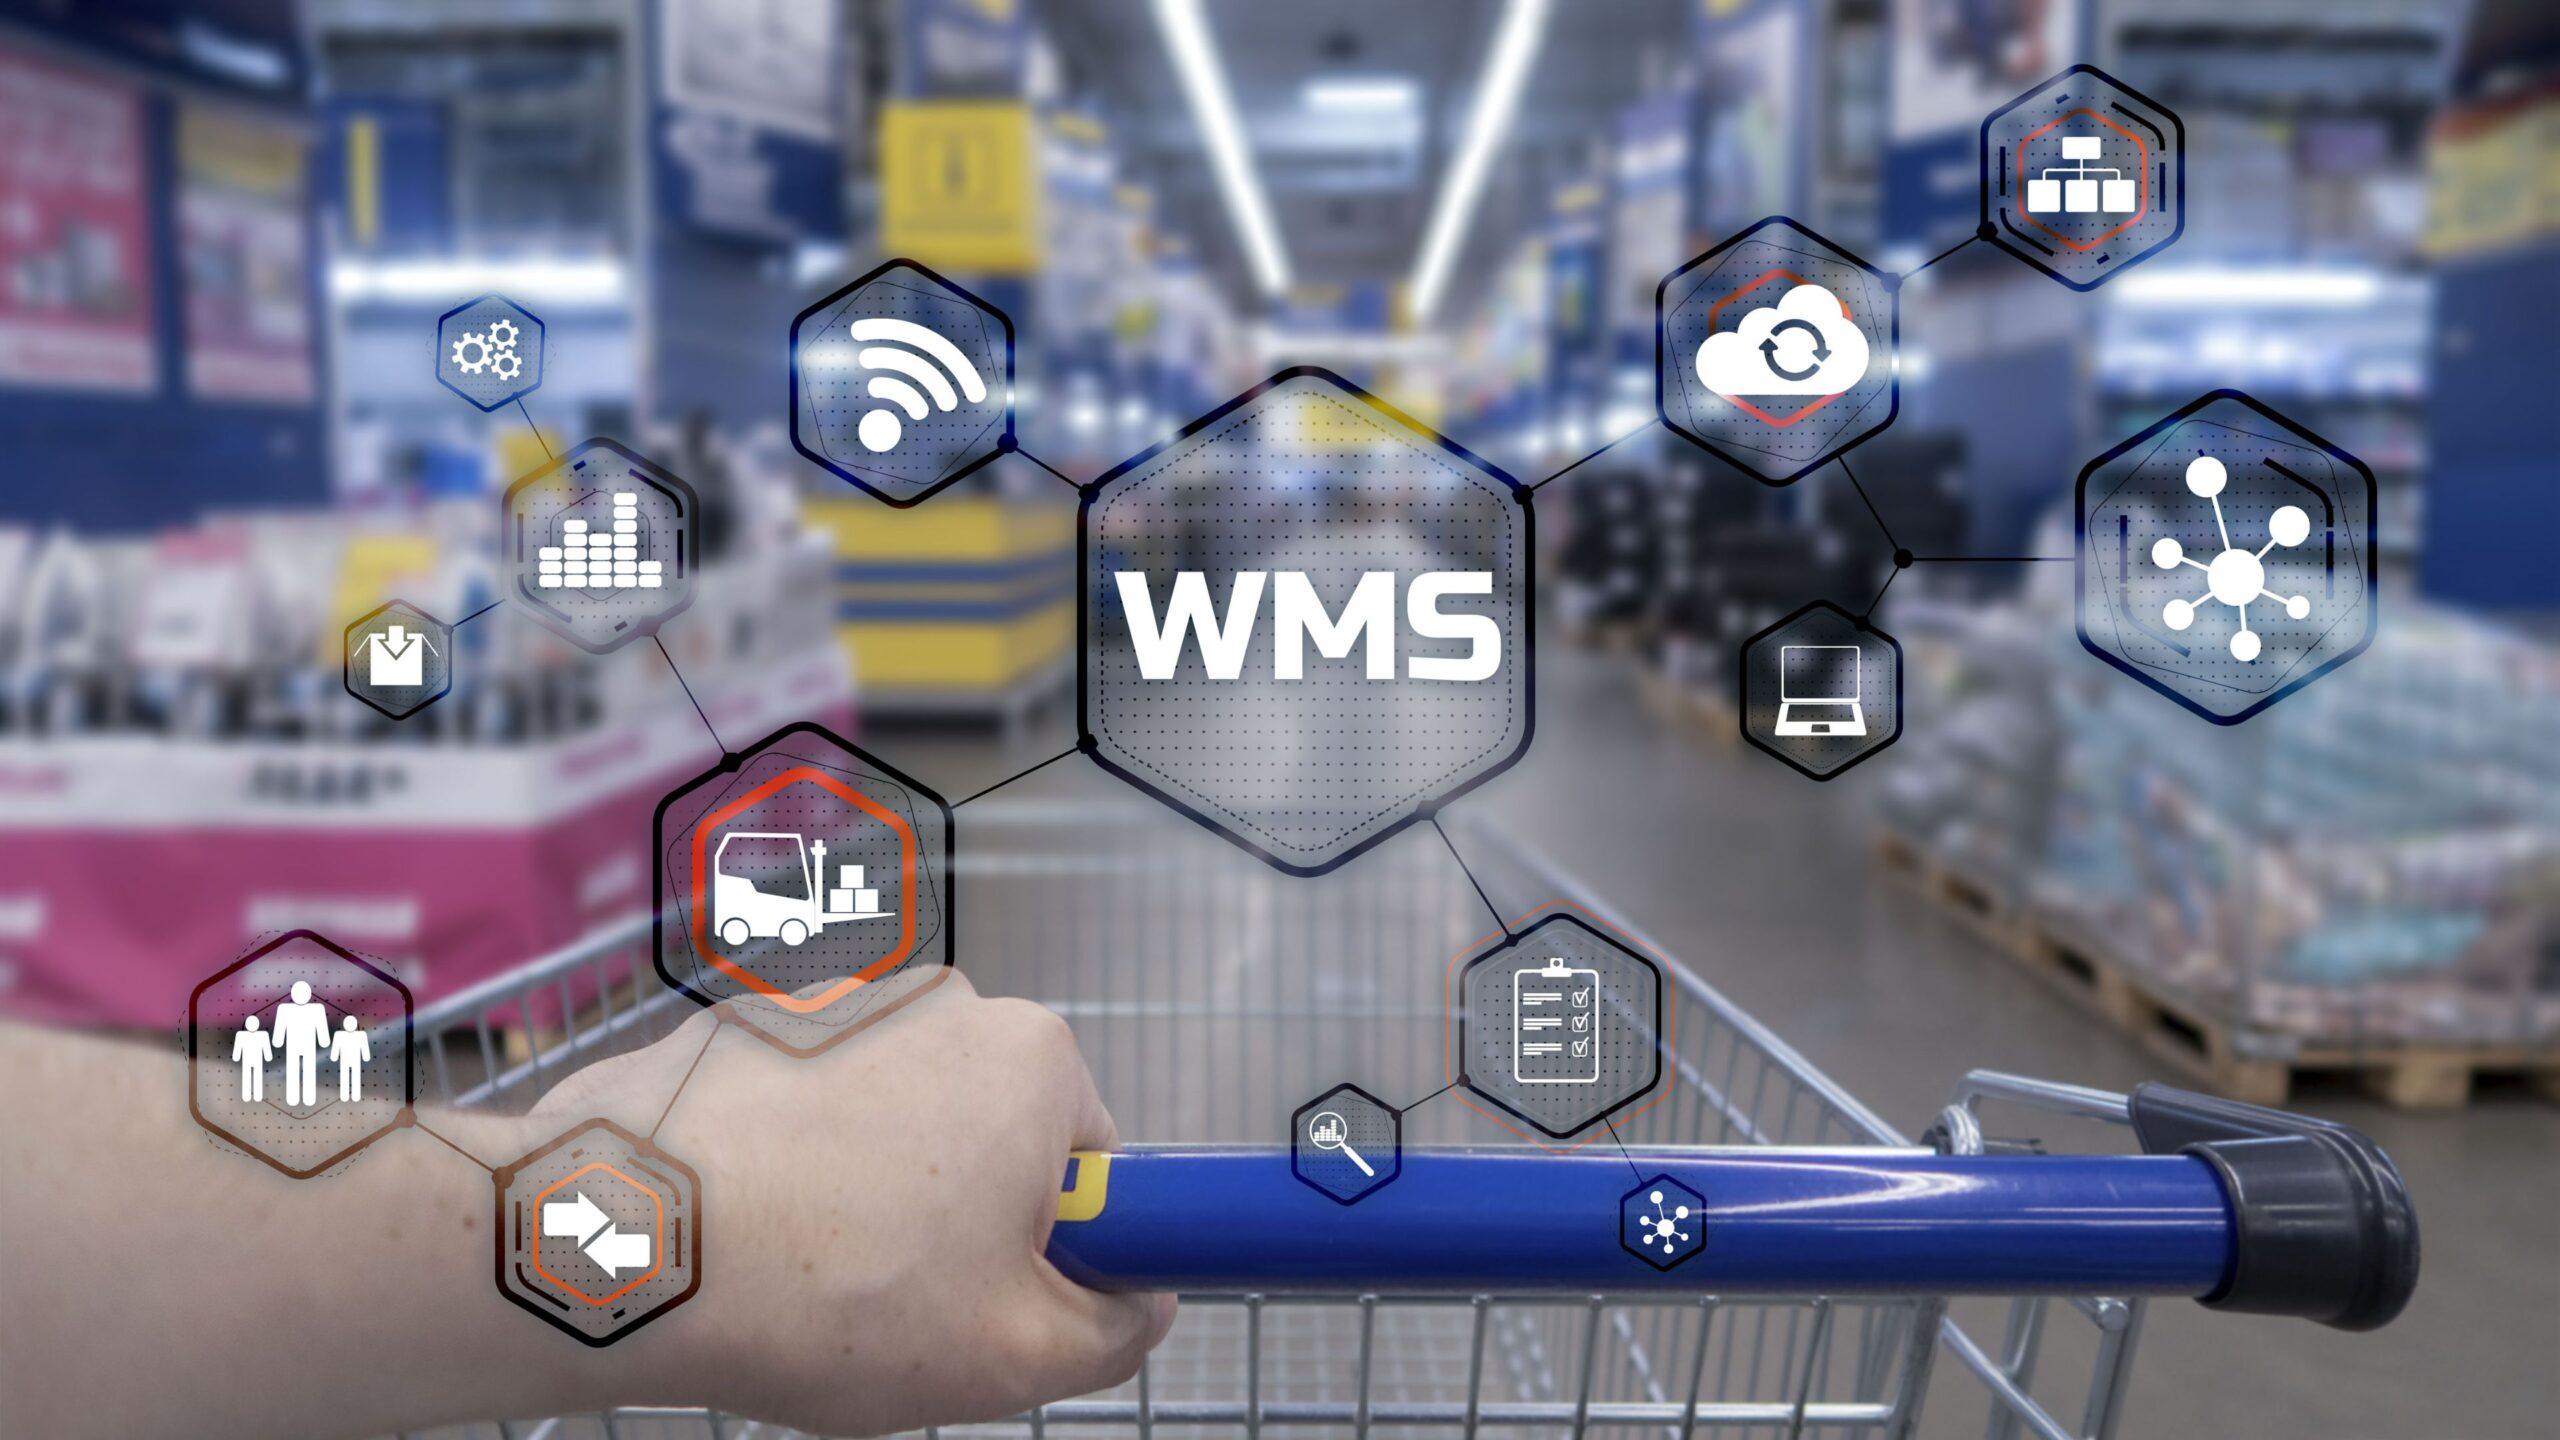 Warehouse Management System (WMS) Integration with SAP Business One